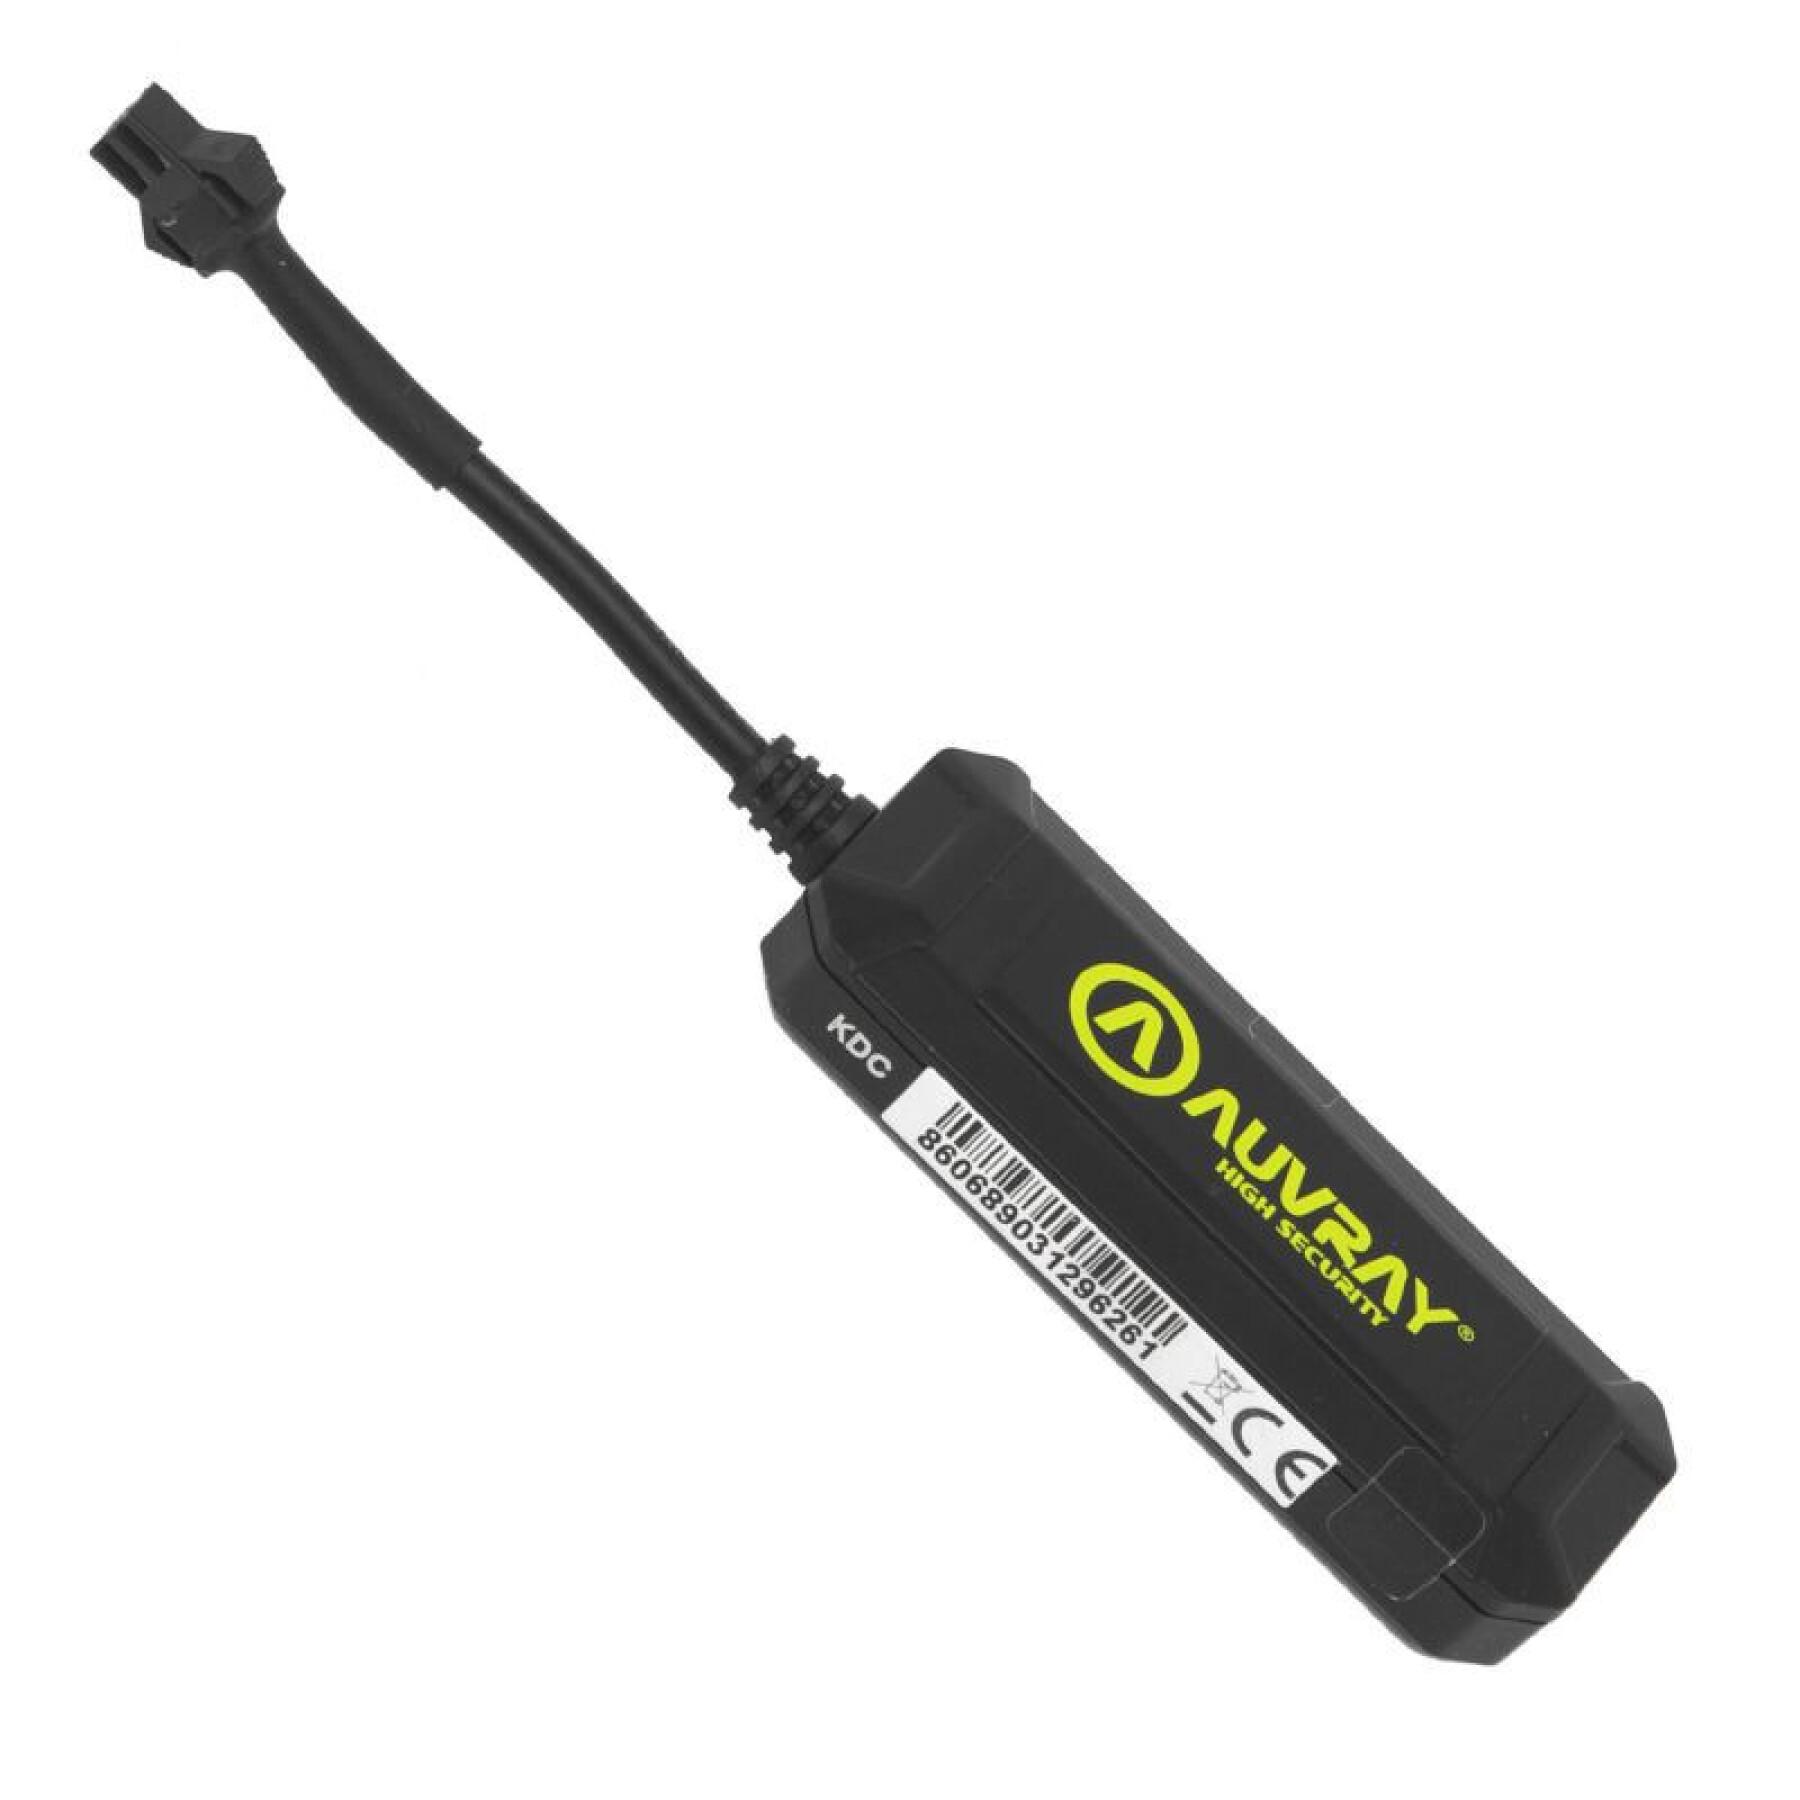 Tracker gps universal safety device for vae-moto-scooter-car Auvray Gobox